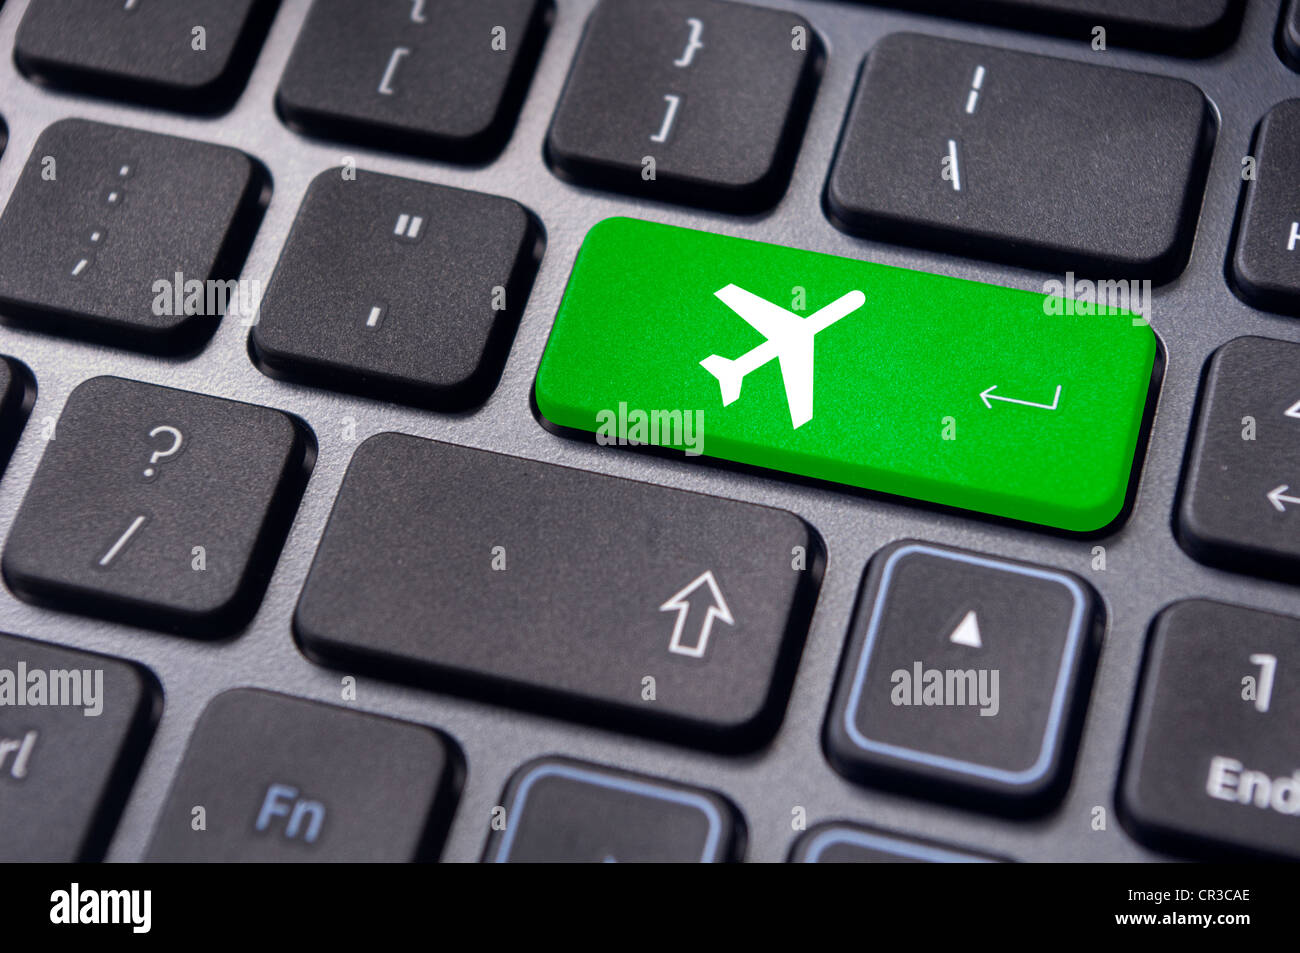 a plane sign on keyboard, to illustrate online booking or purchase of plane ticket or business travel concepts. Stock Photo